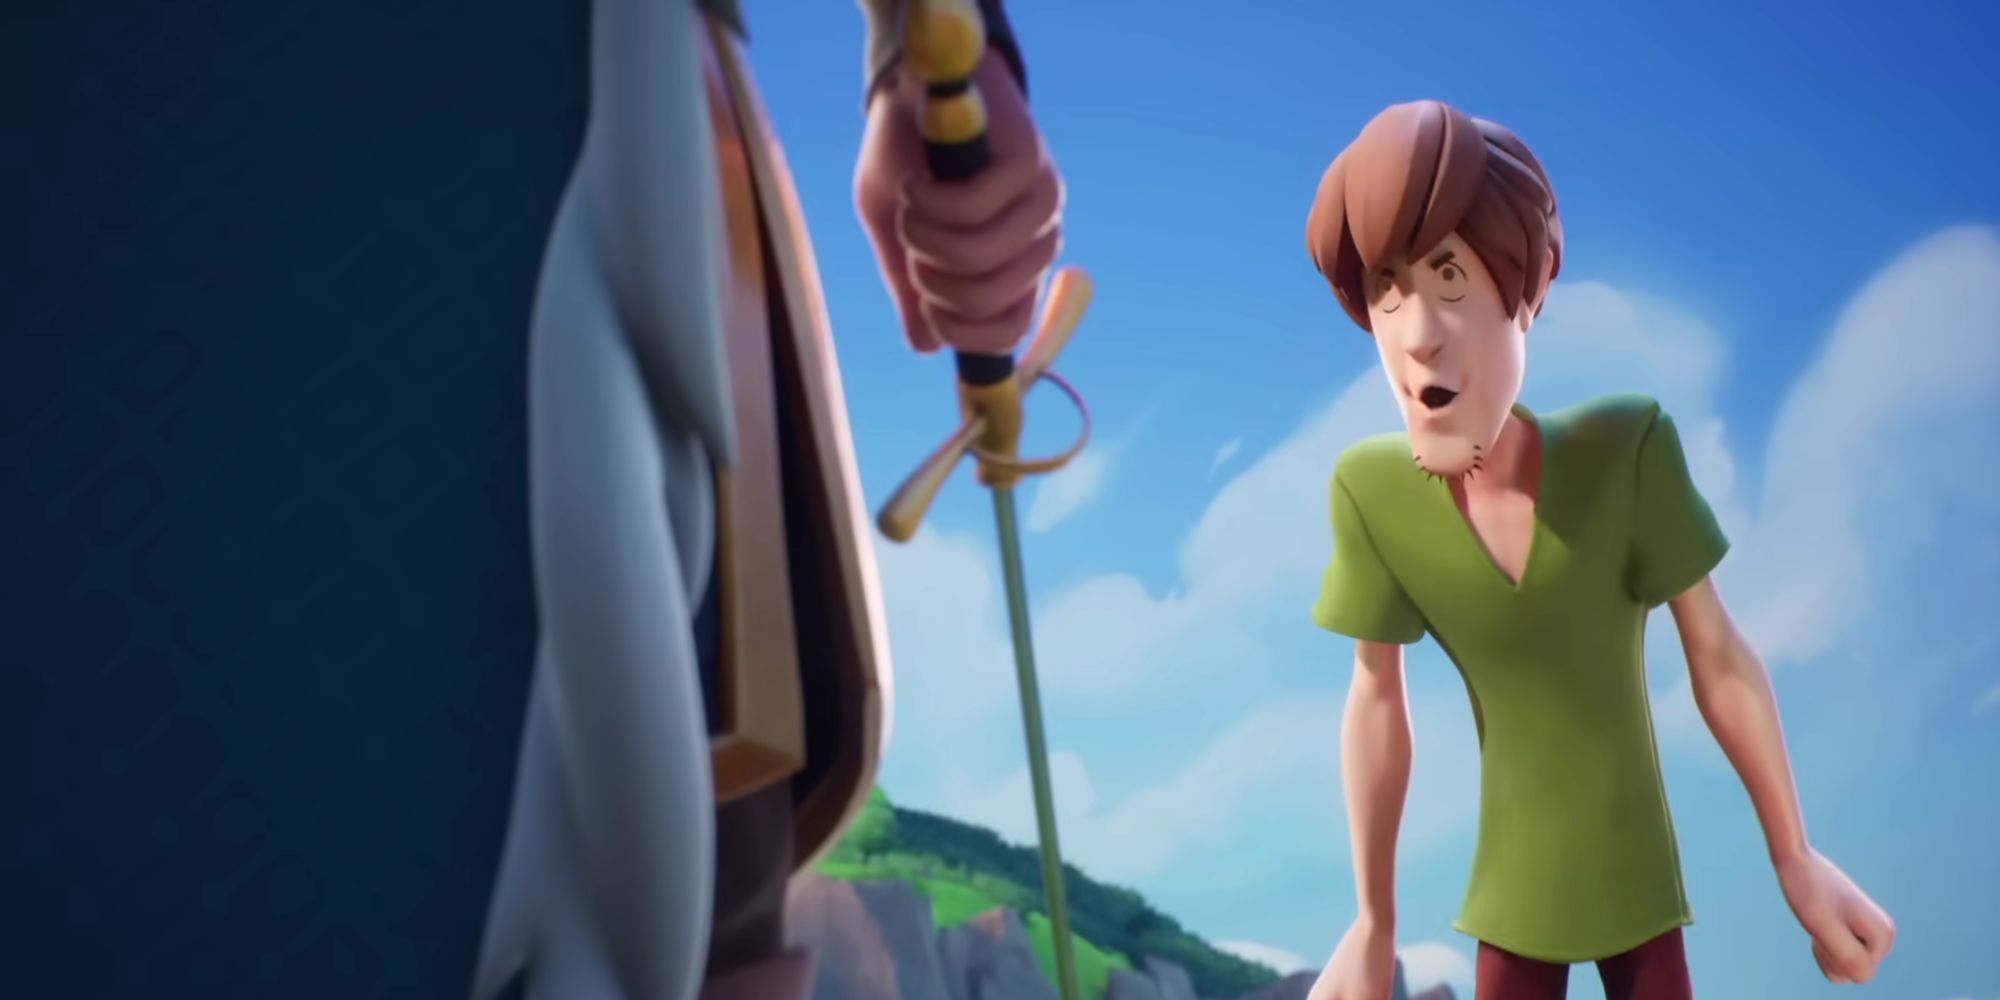 Shaggy getting mad at Arya in MultiVersus.